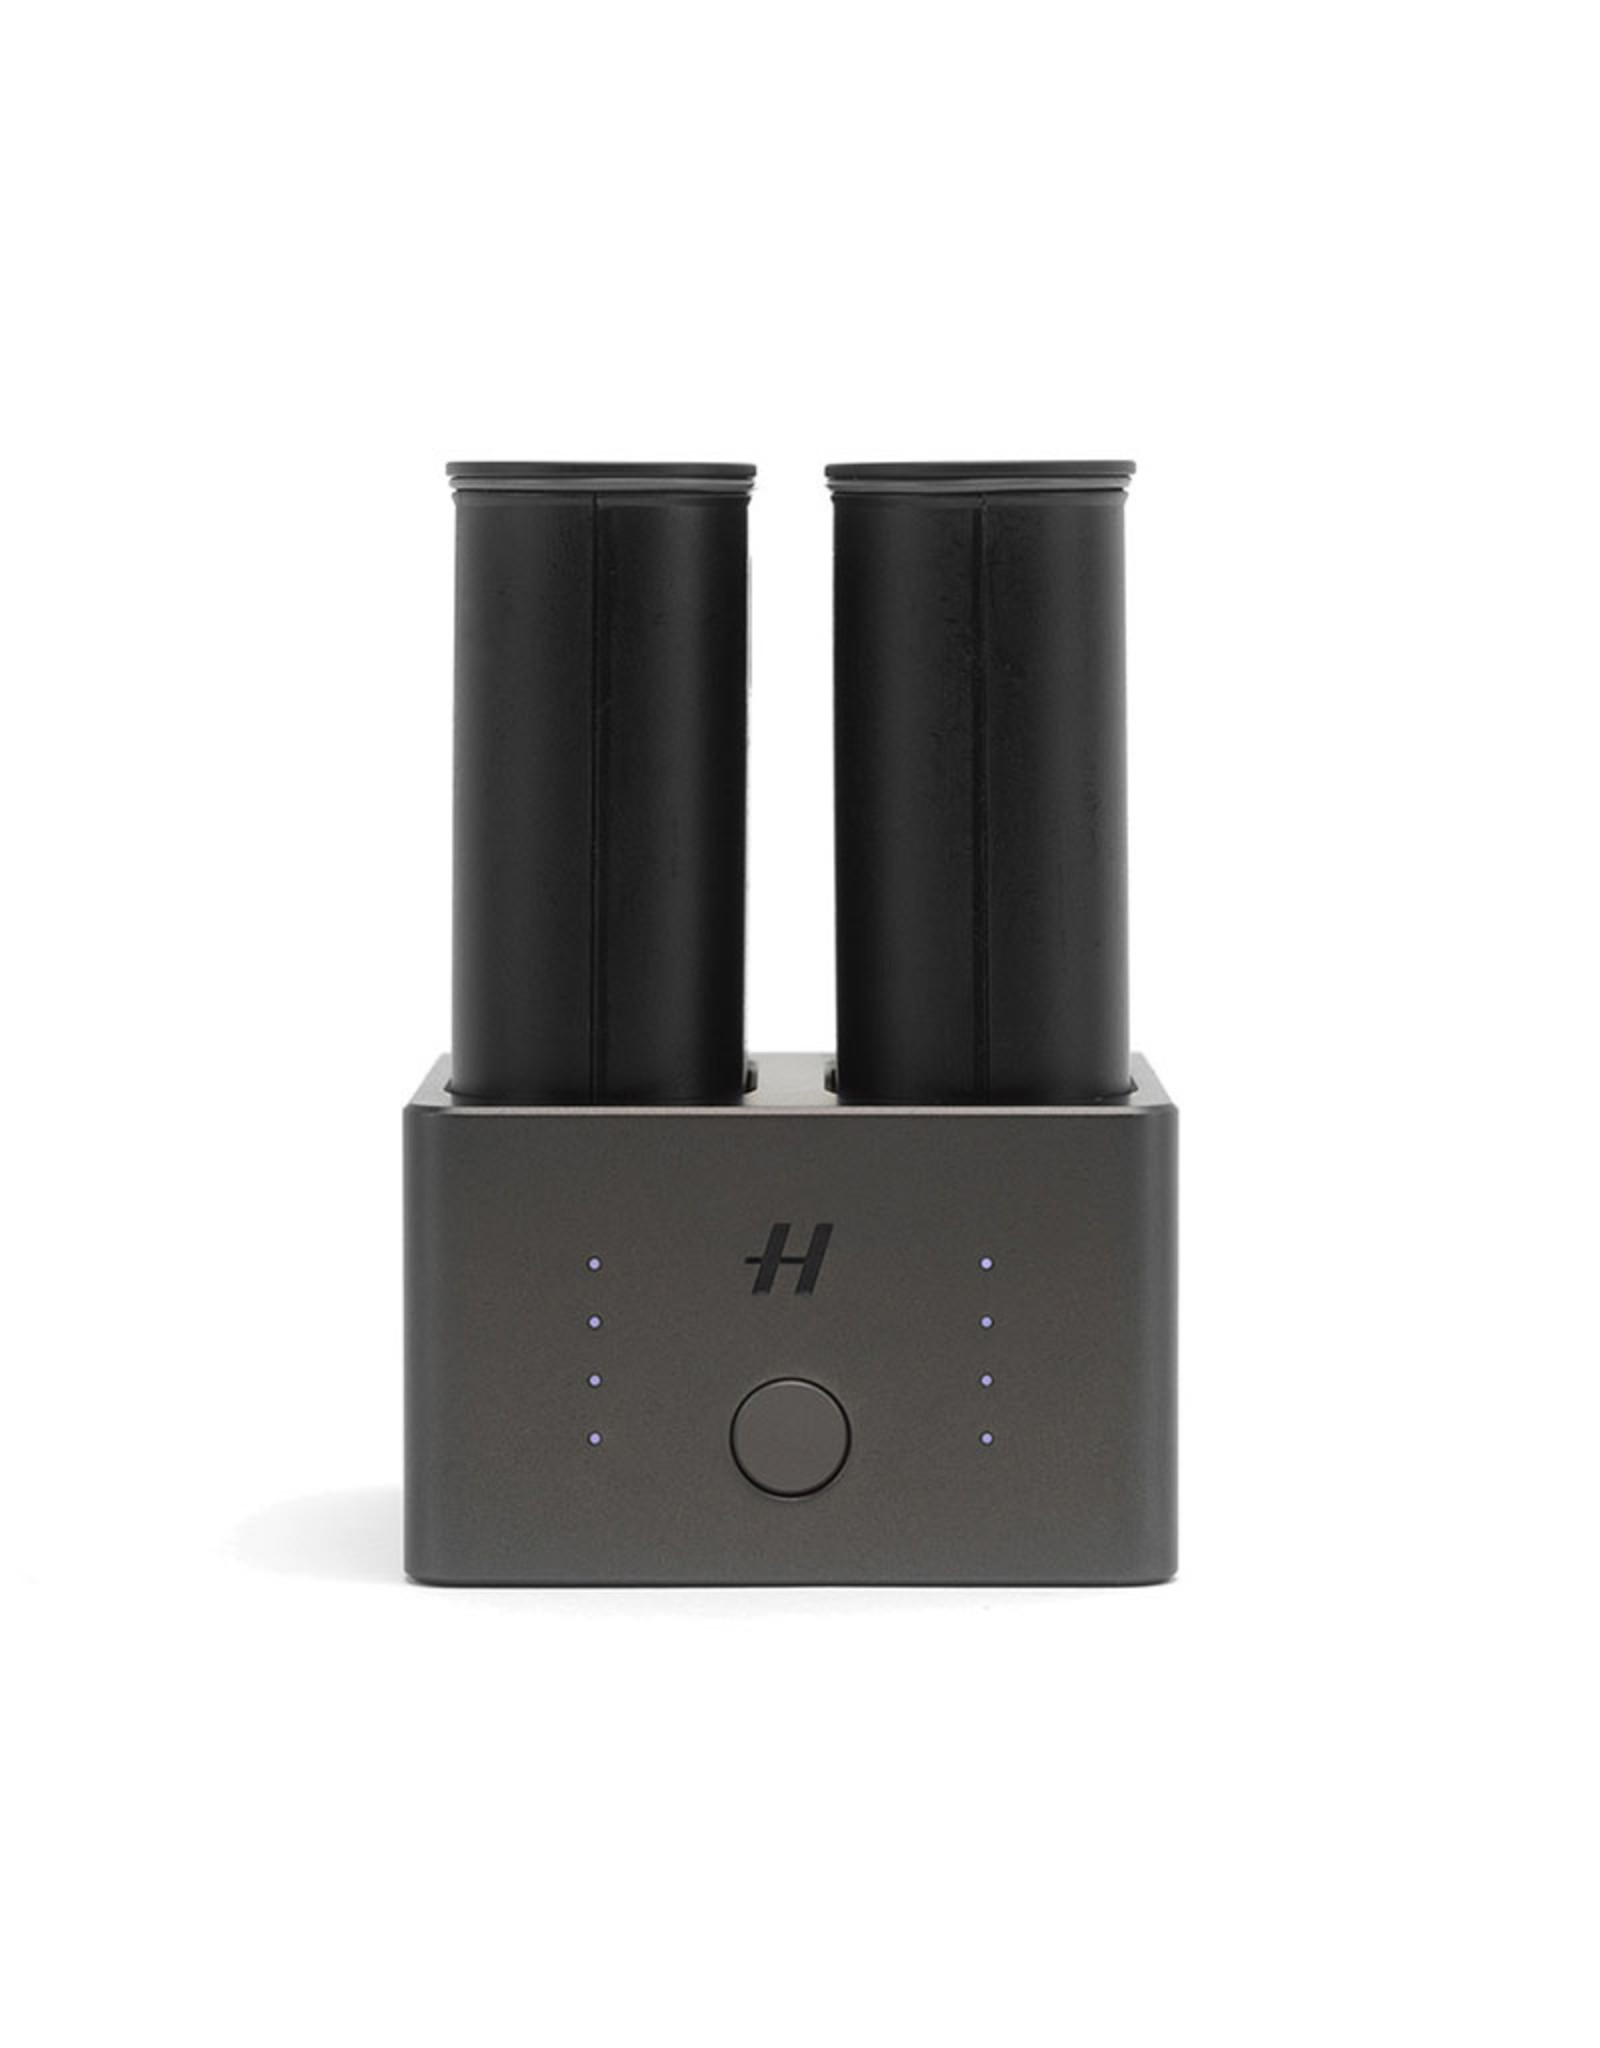 Hasselblad Hasselblad Battery Charging Hub Set for X system. 2-Bay Charger with USB Type-C Connector.